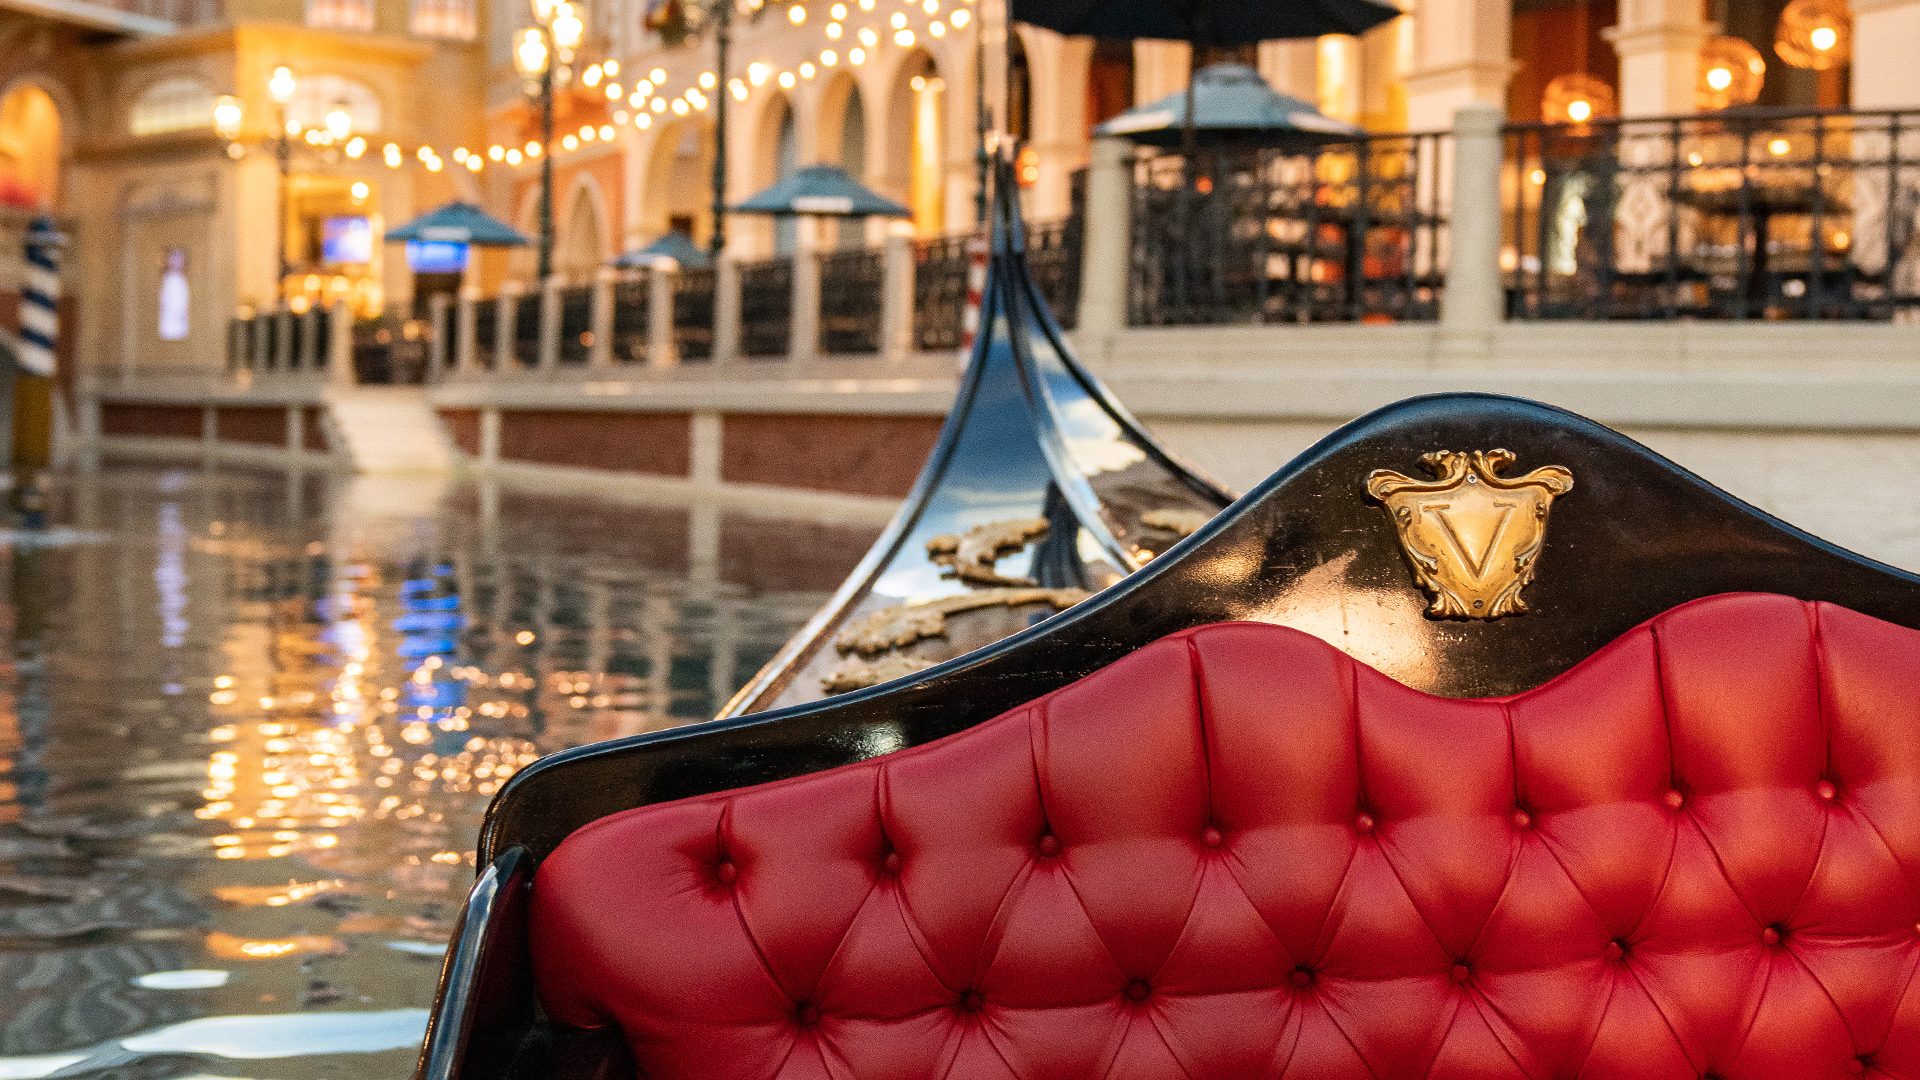 Float through the Grand Canal Shoppes